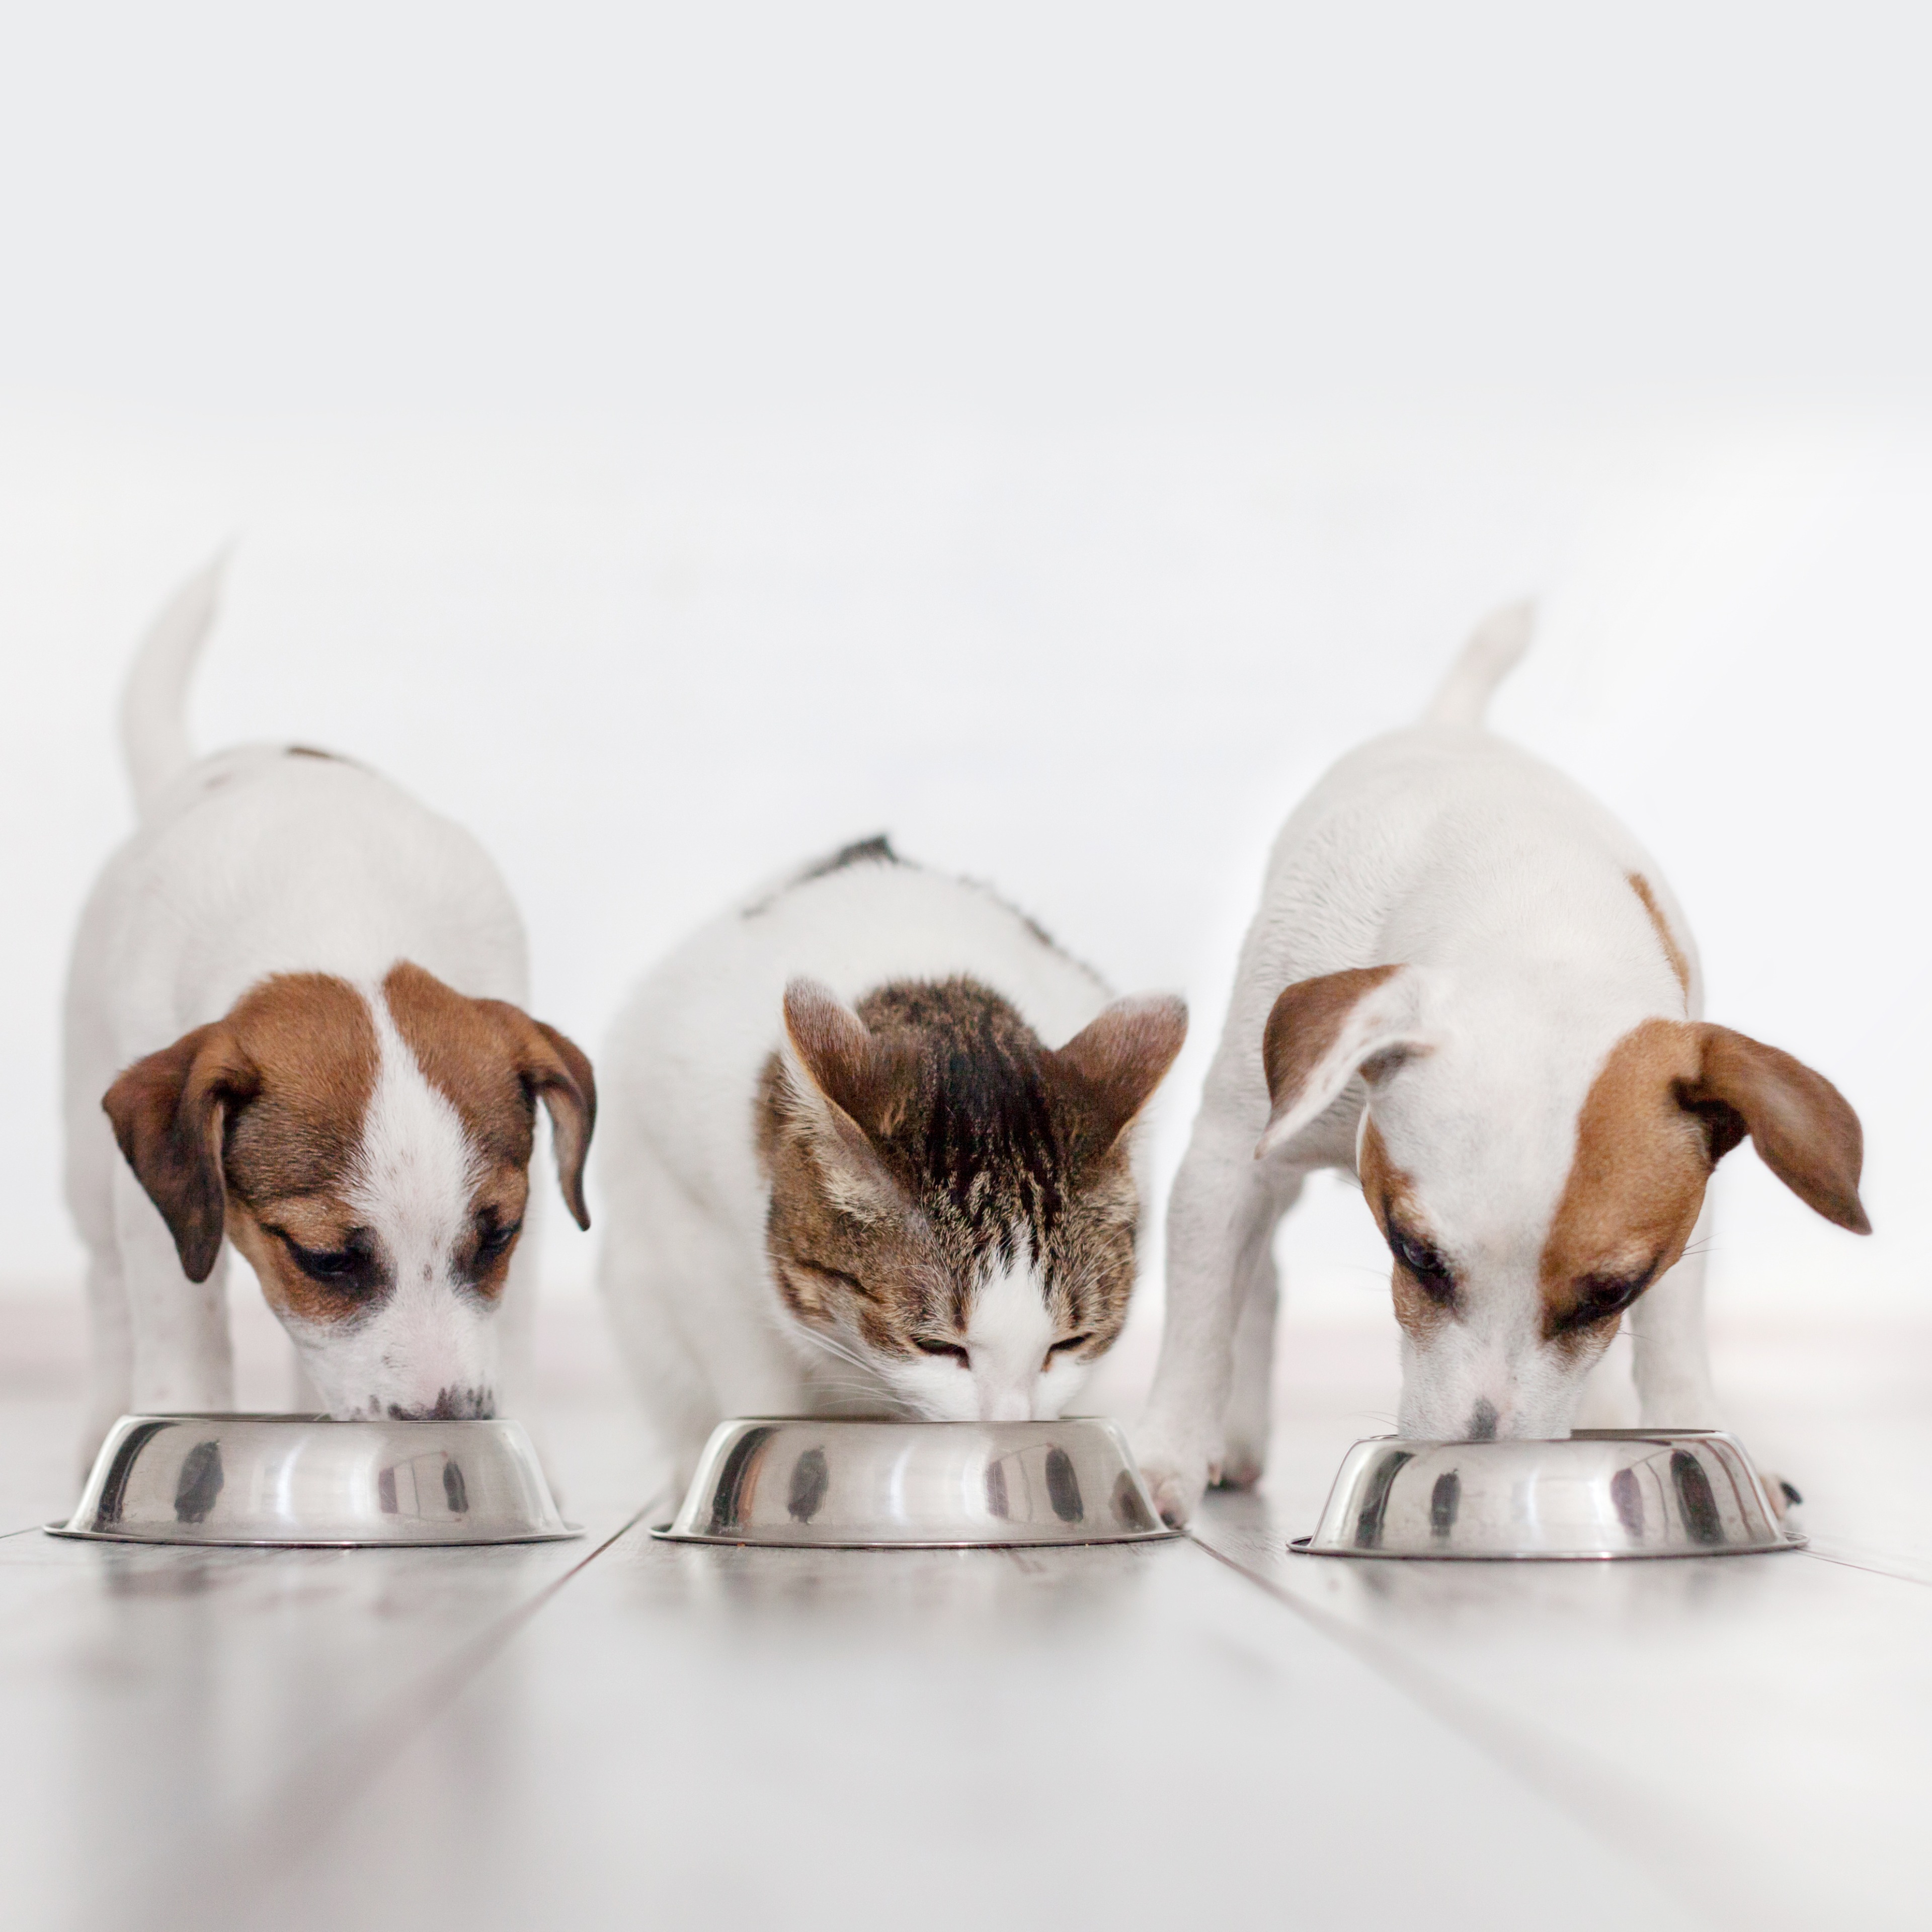 Achieving Multiple Benefits with Functional Fiber Ingredients - A Holistic Approach to Pet Food Innovation